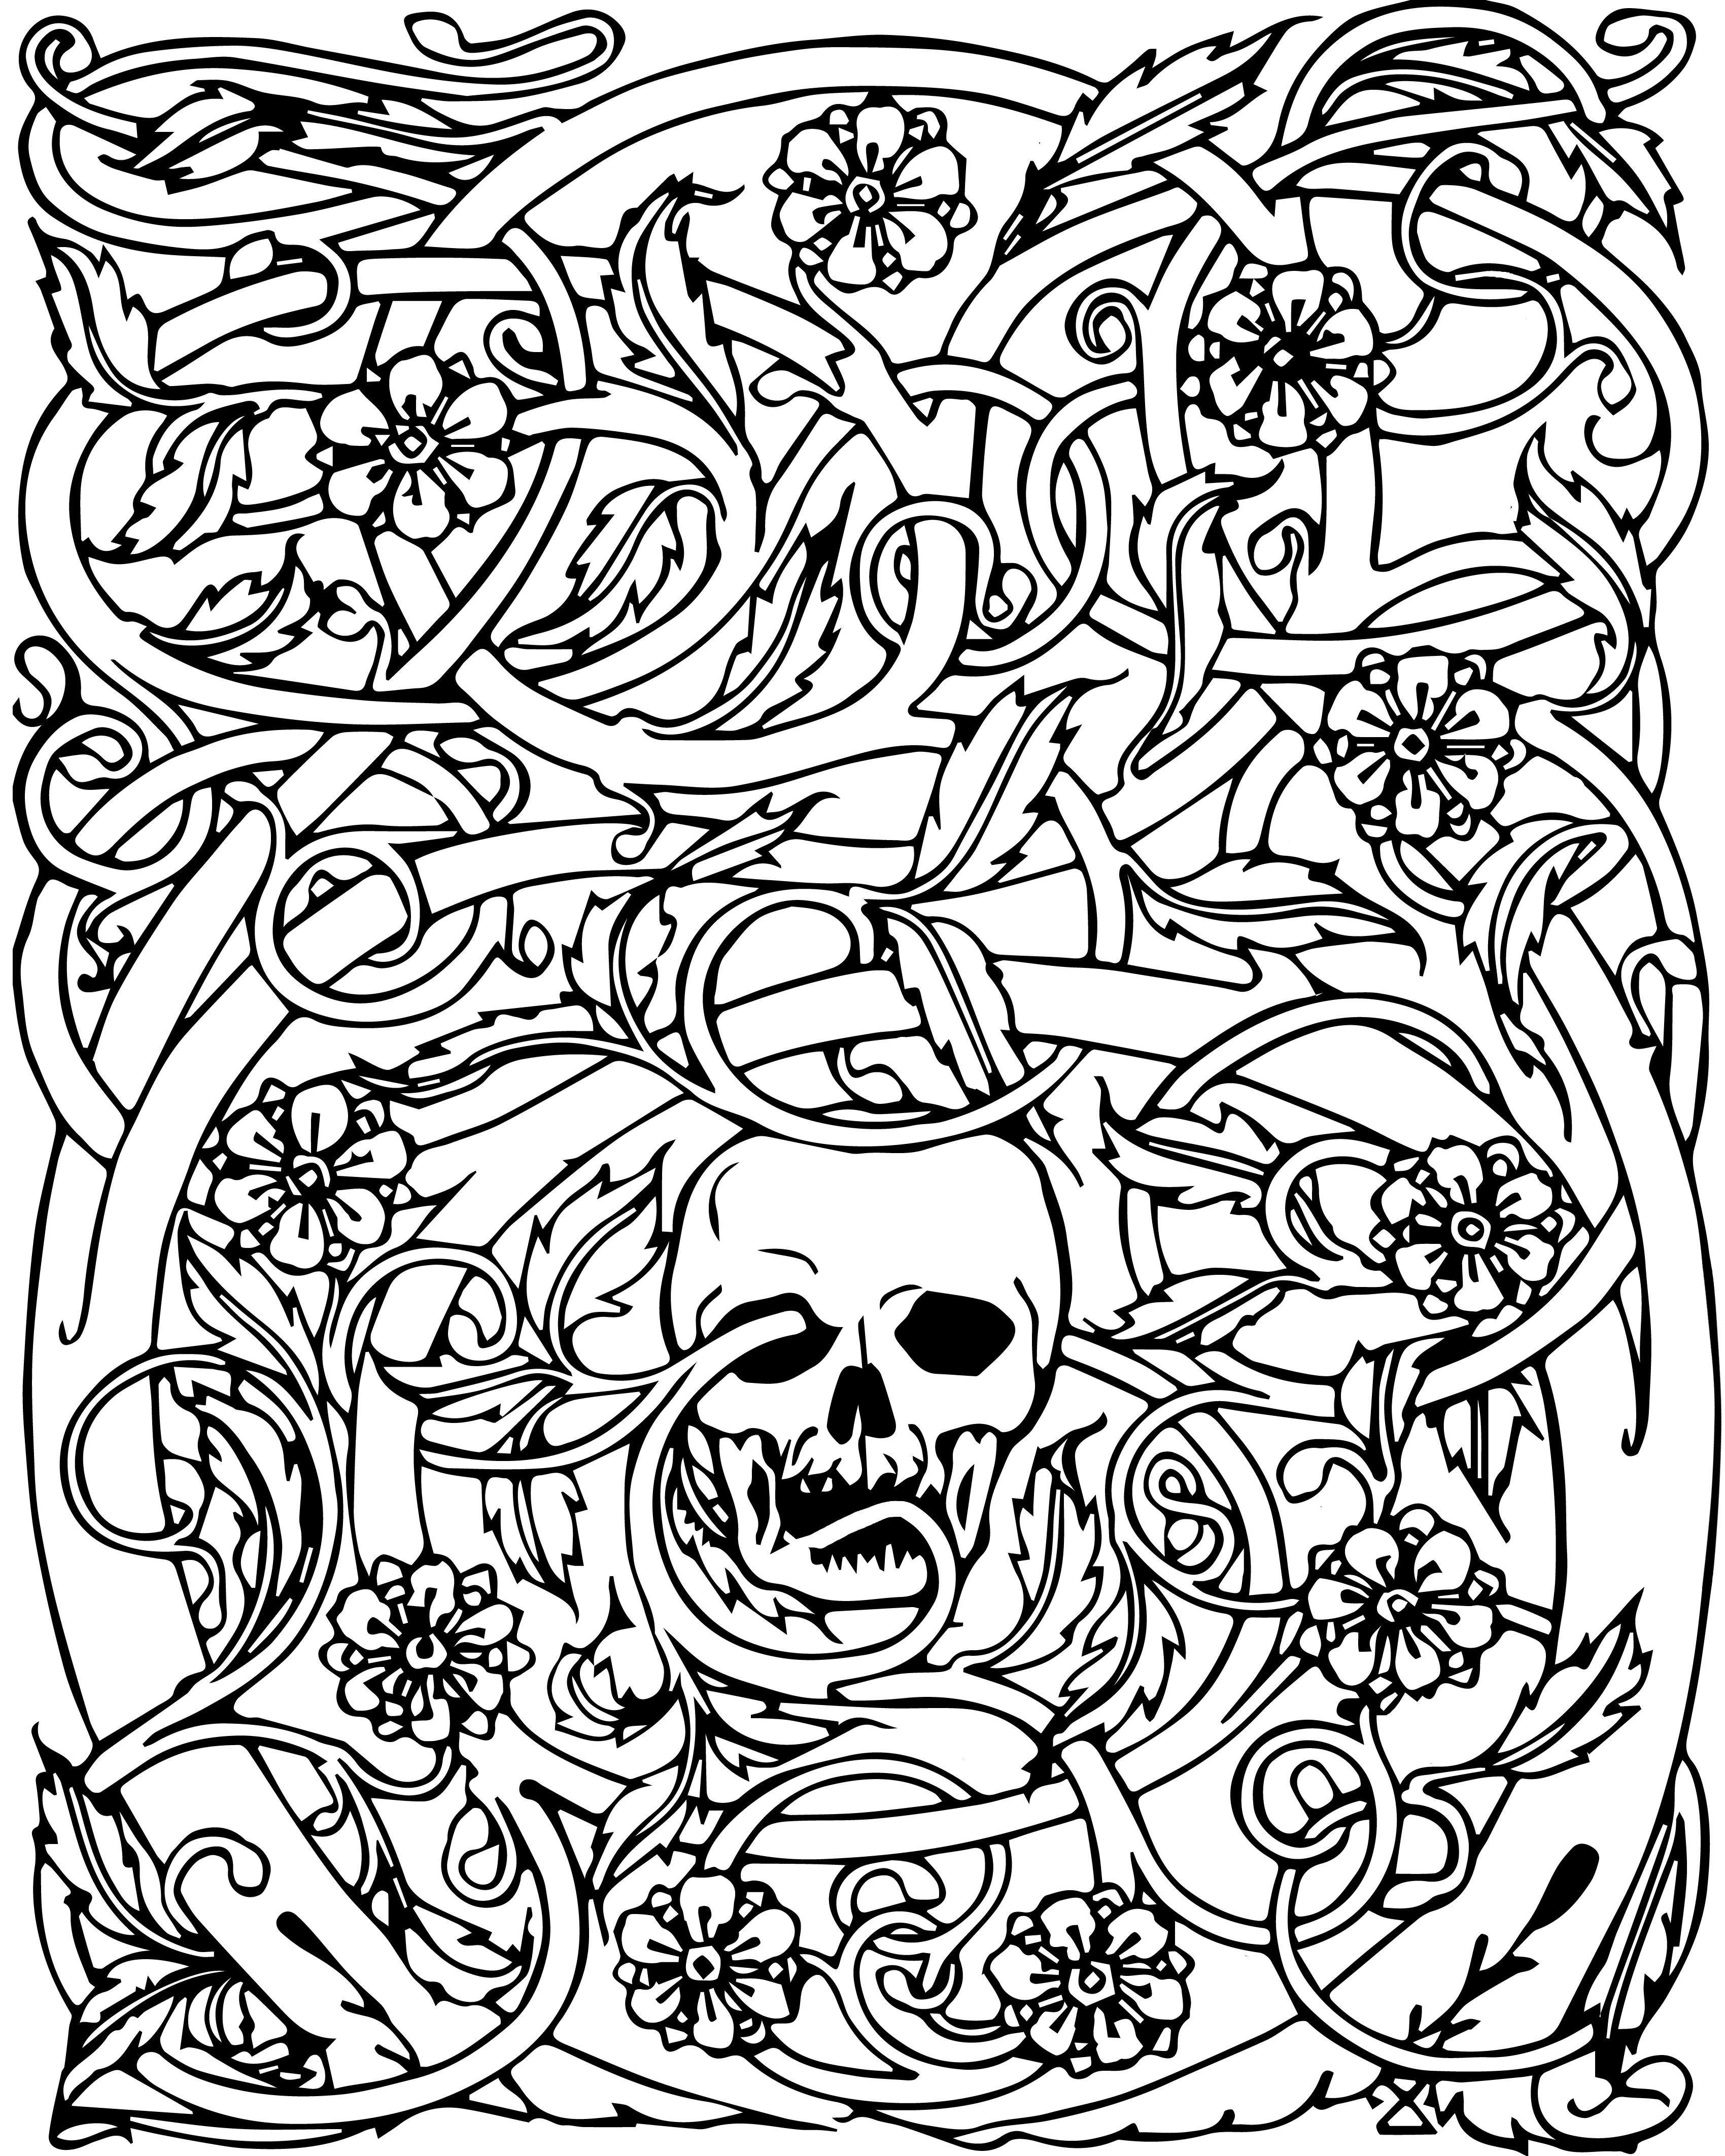 Horror Coloring Pages at GetColorings.com   Free printable colorings ...